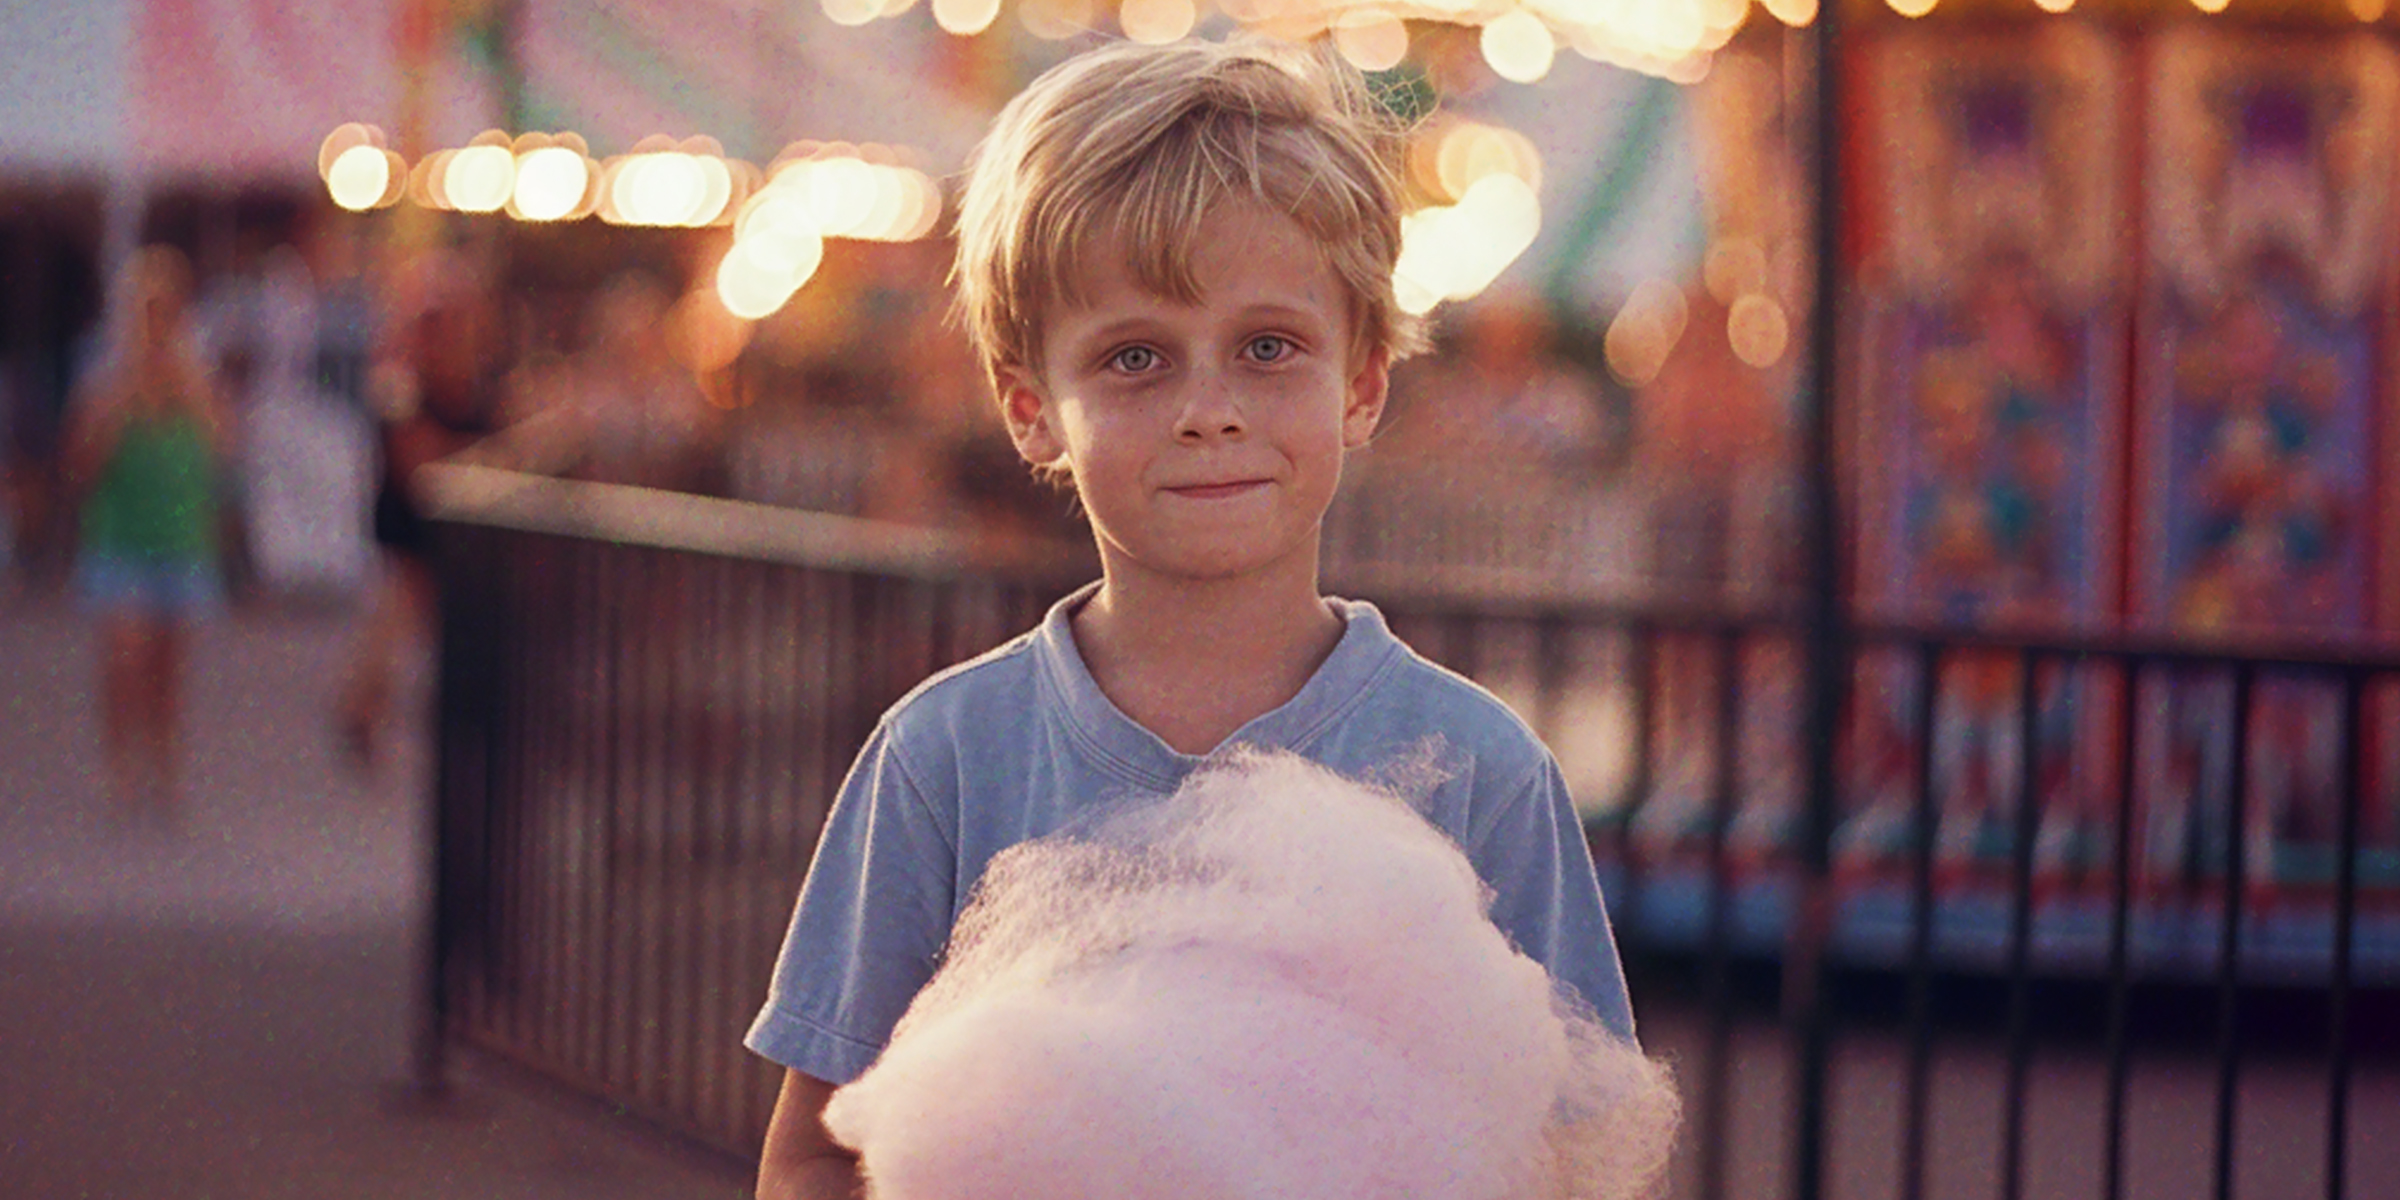 Boy with cotton candy | Source: Amomama